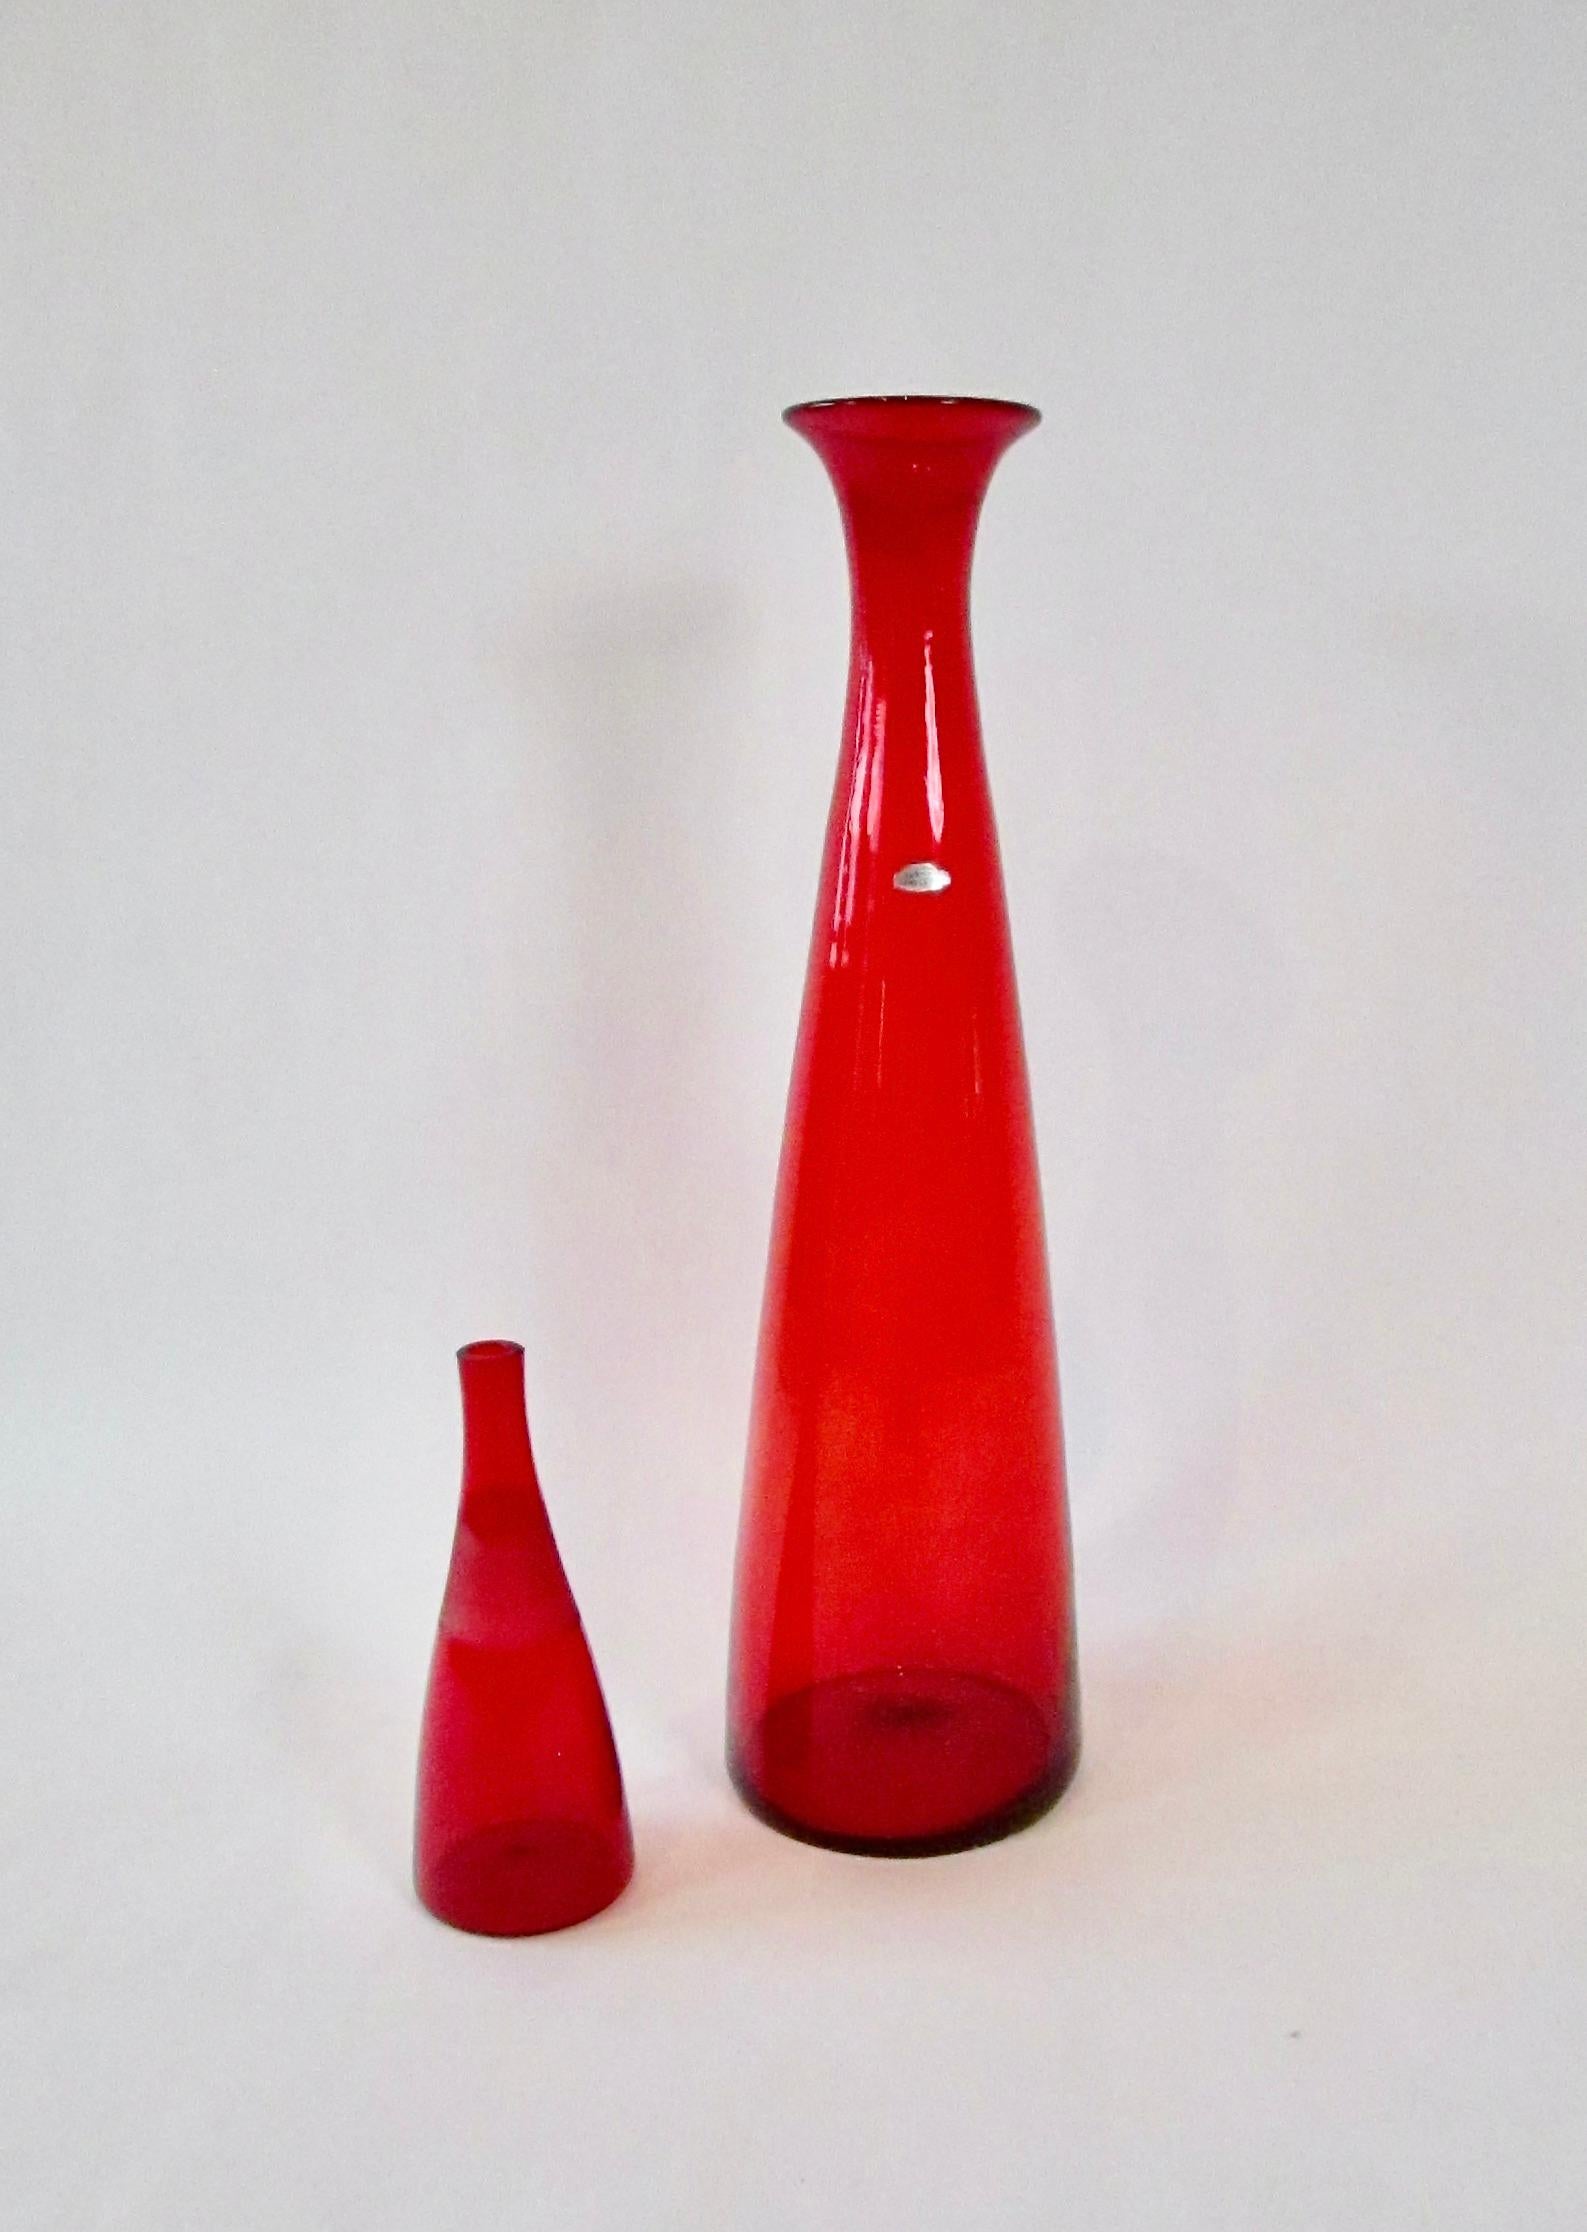 Hand-Crafted Tall Bright Red Blenko Glass Floor Vase